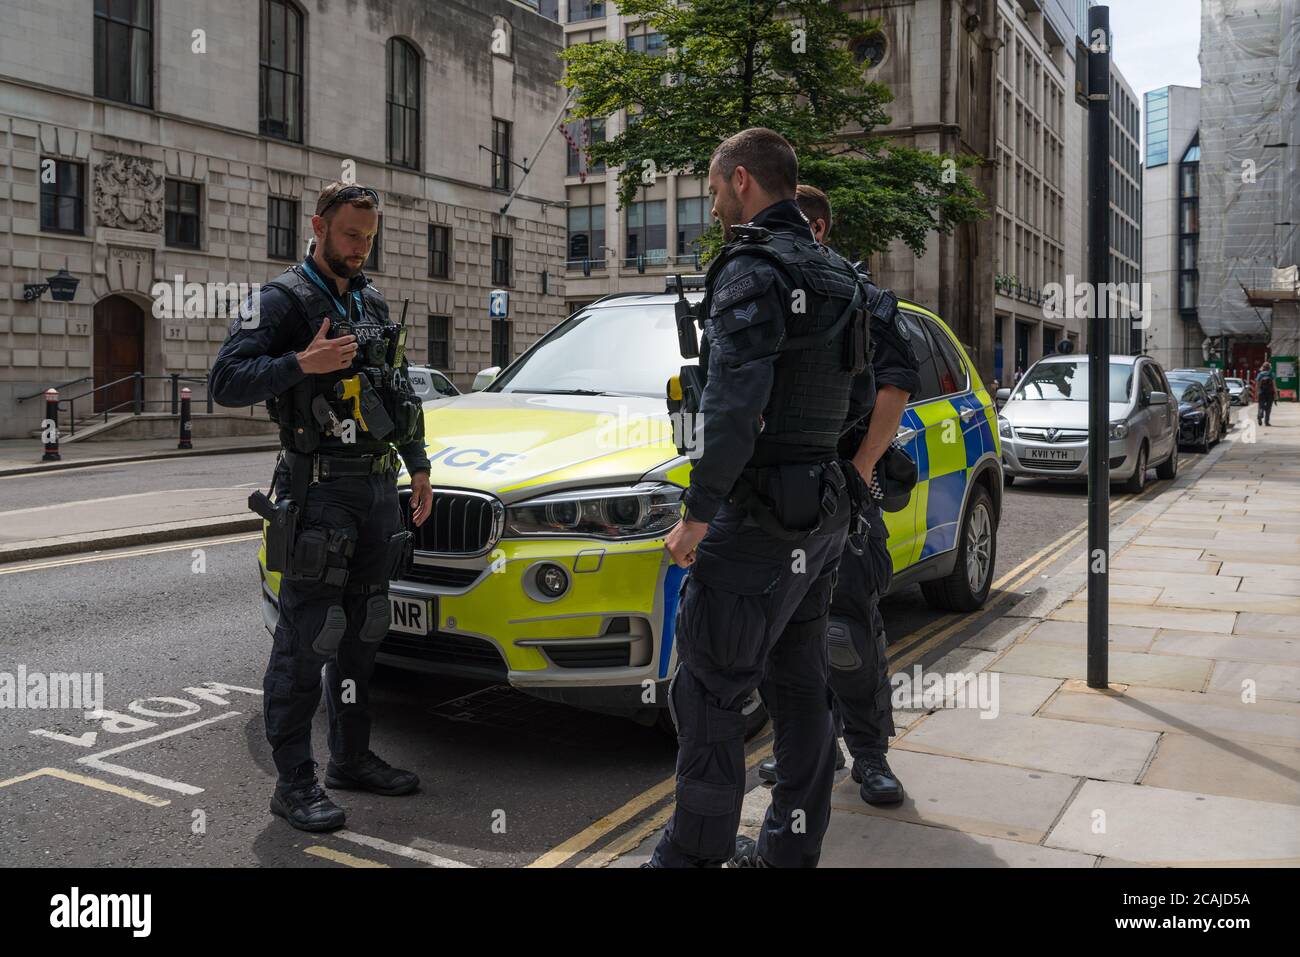 City of London armed police officers take a break and stand in conversation next to parked police car in Wood Street, London, England, UK Stock Photo